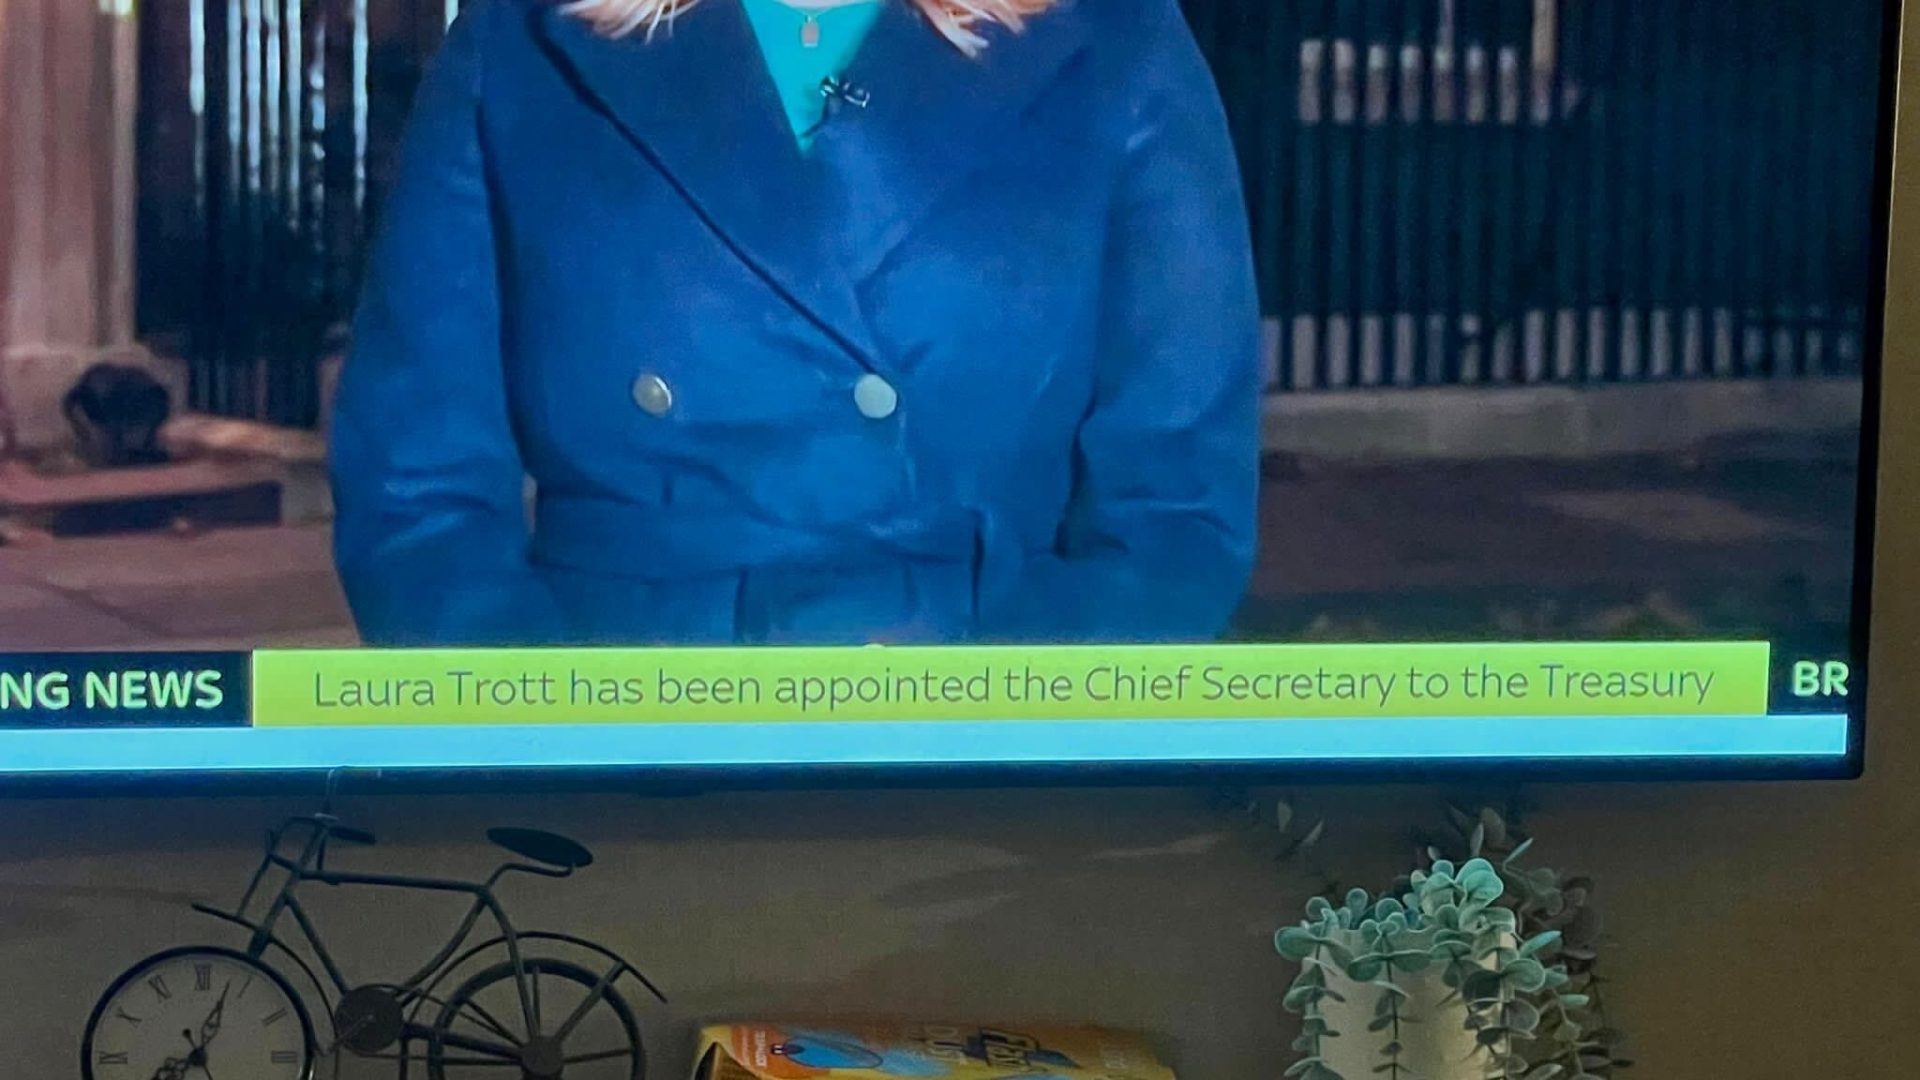 A screenshot of a Sky News report that Laura Trott has been appointed to Chief Secretary of the Treasury.